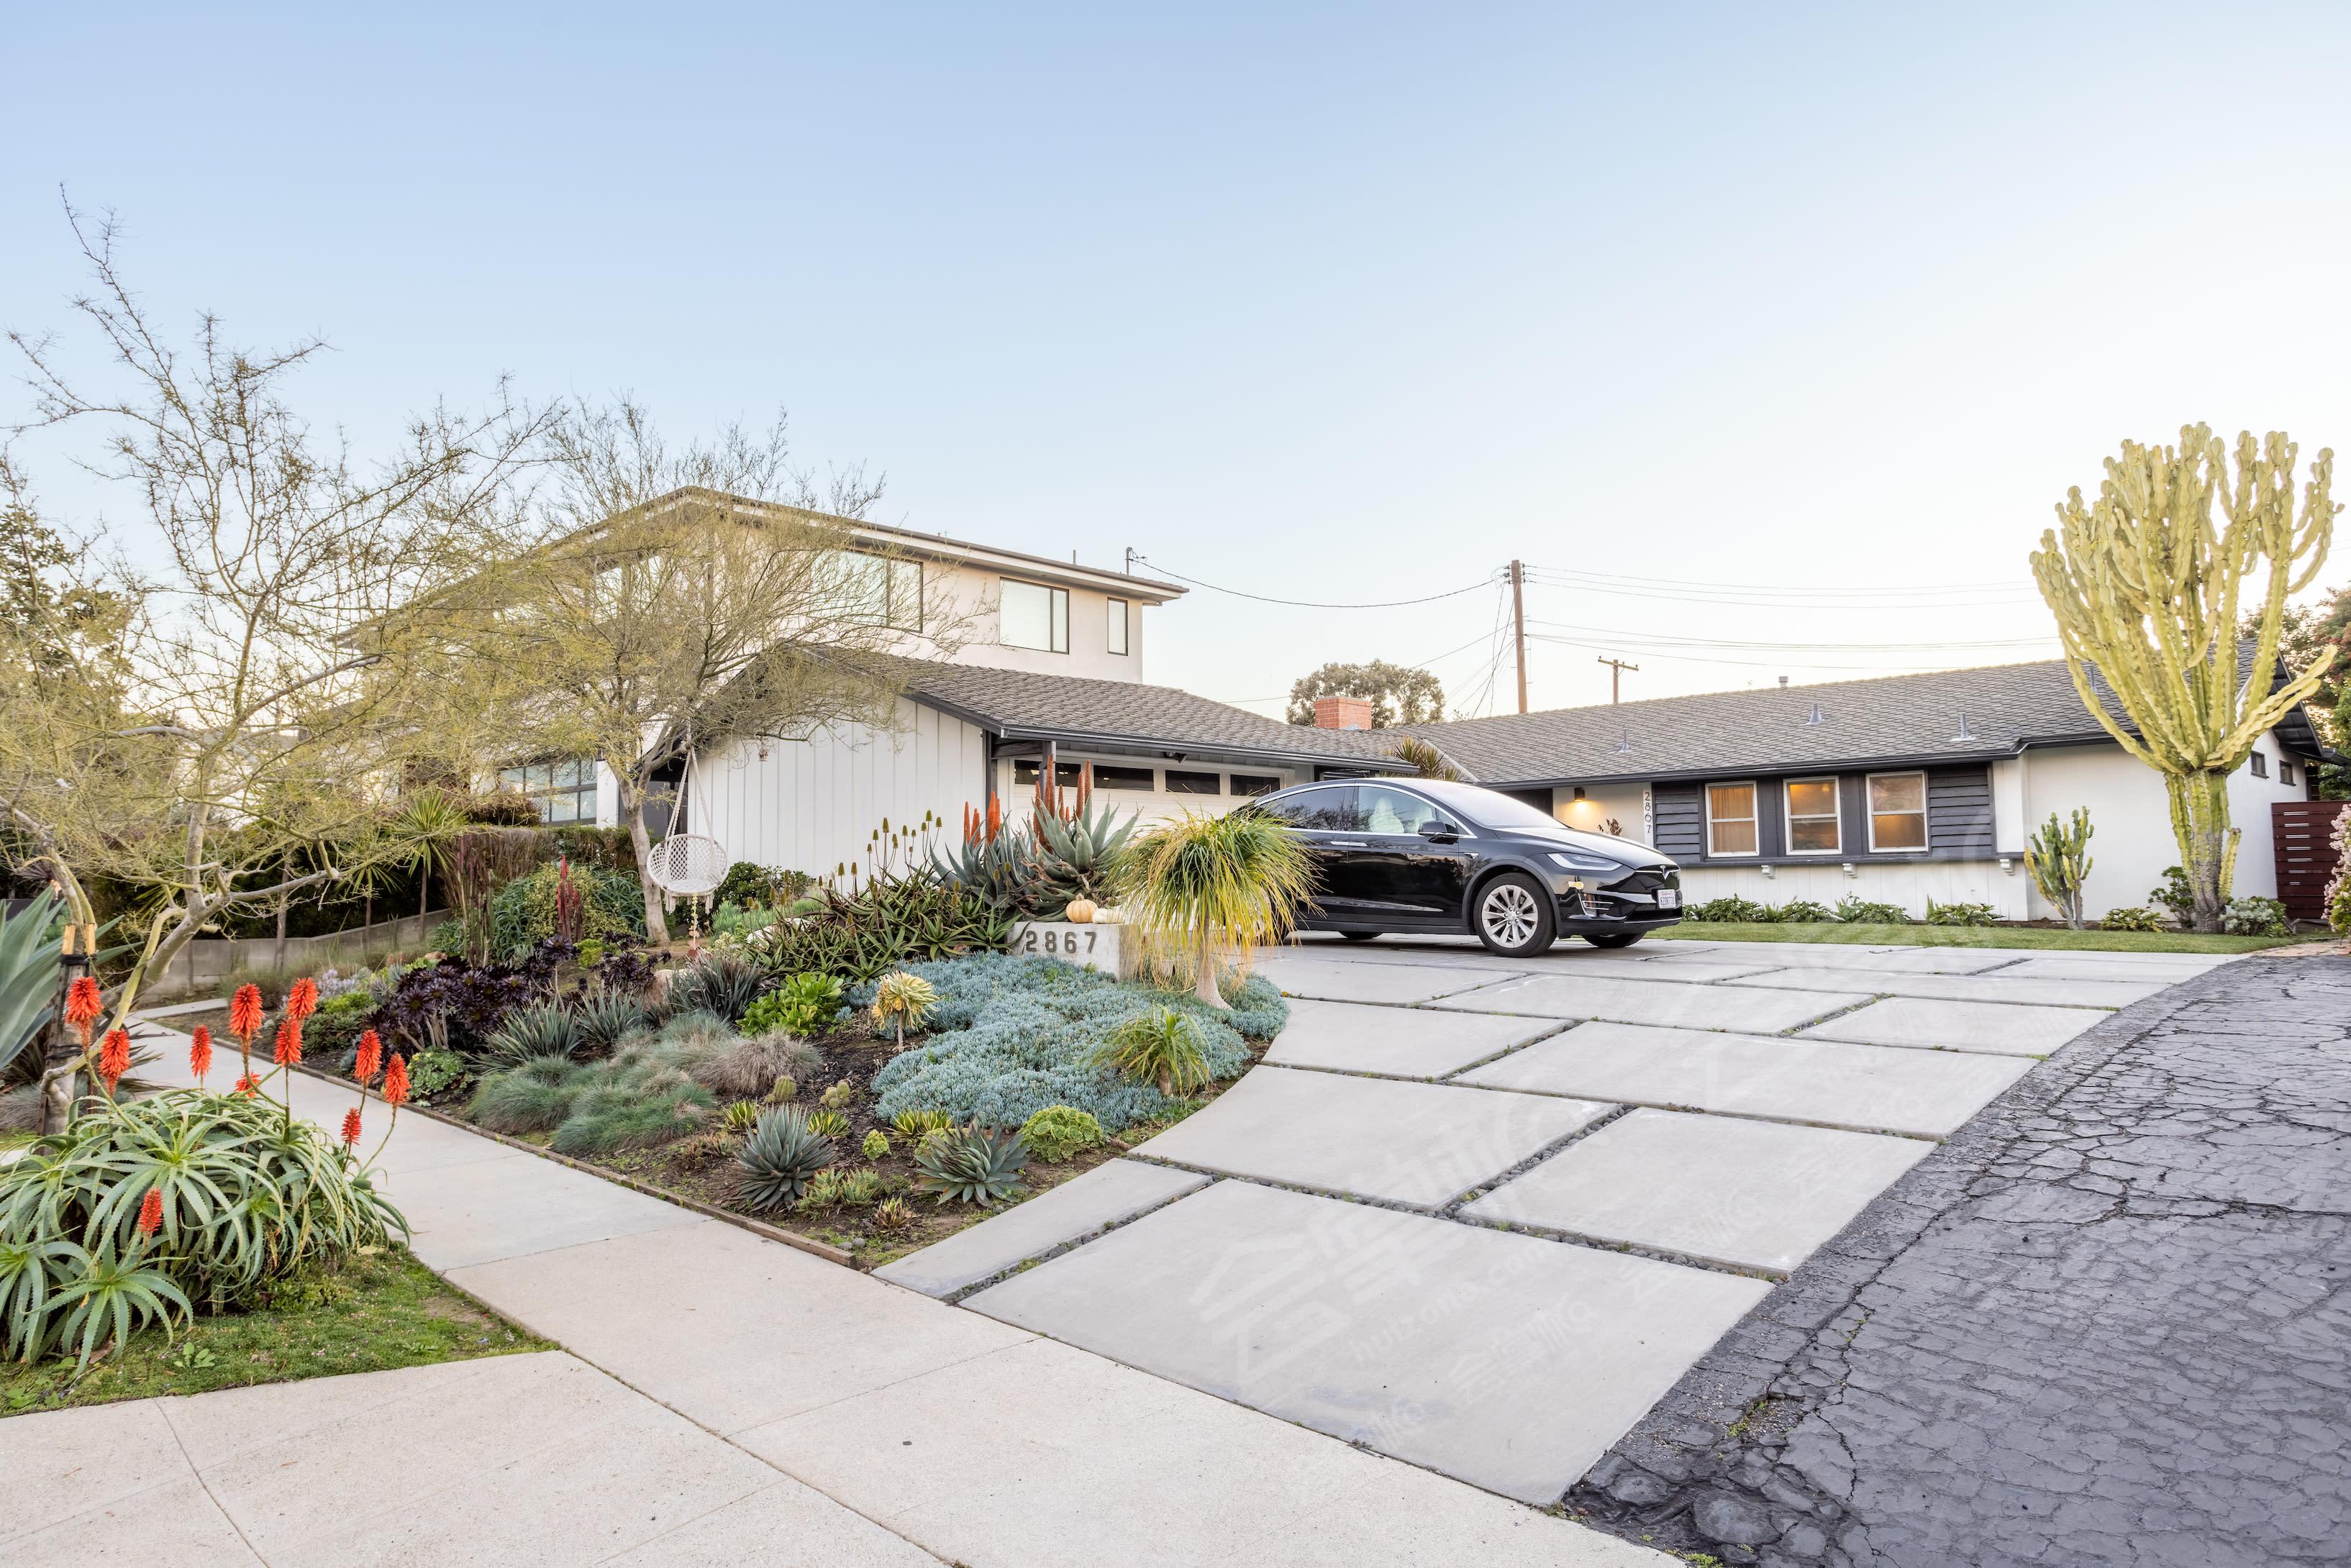 West LA bungalow with incredible energy and gorgeous landscaping.